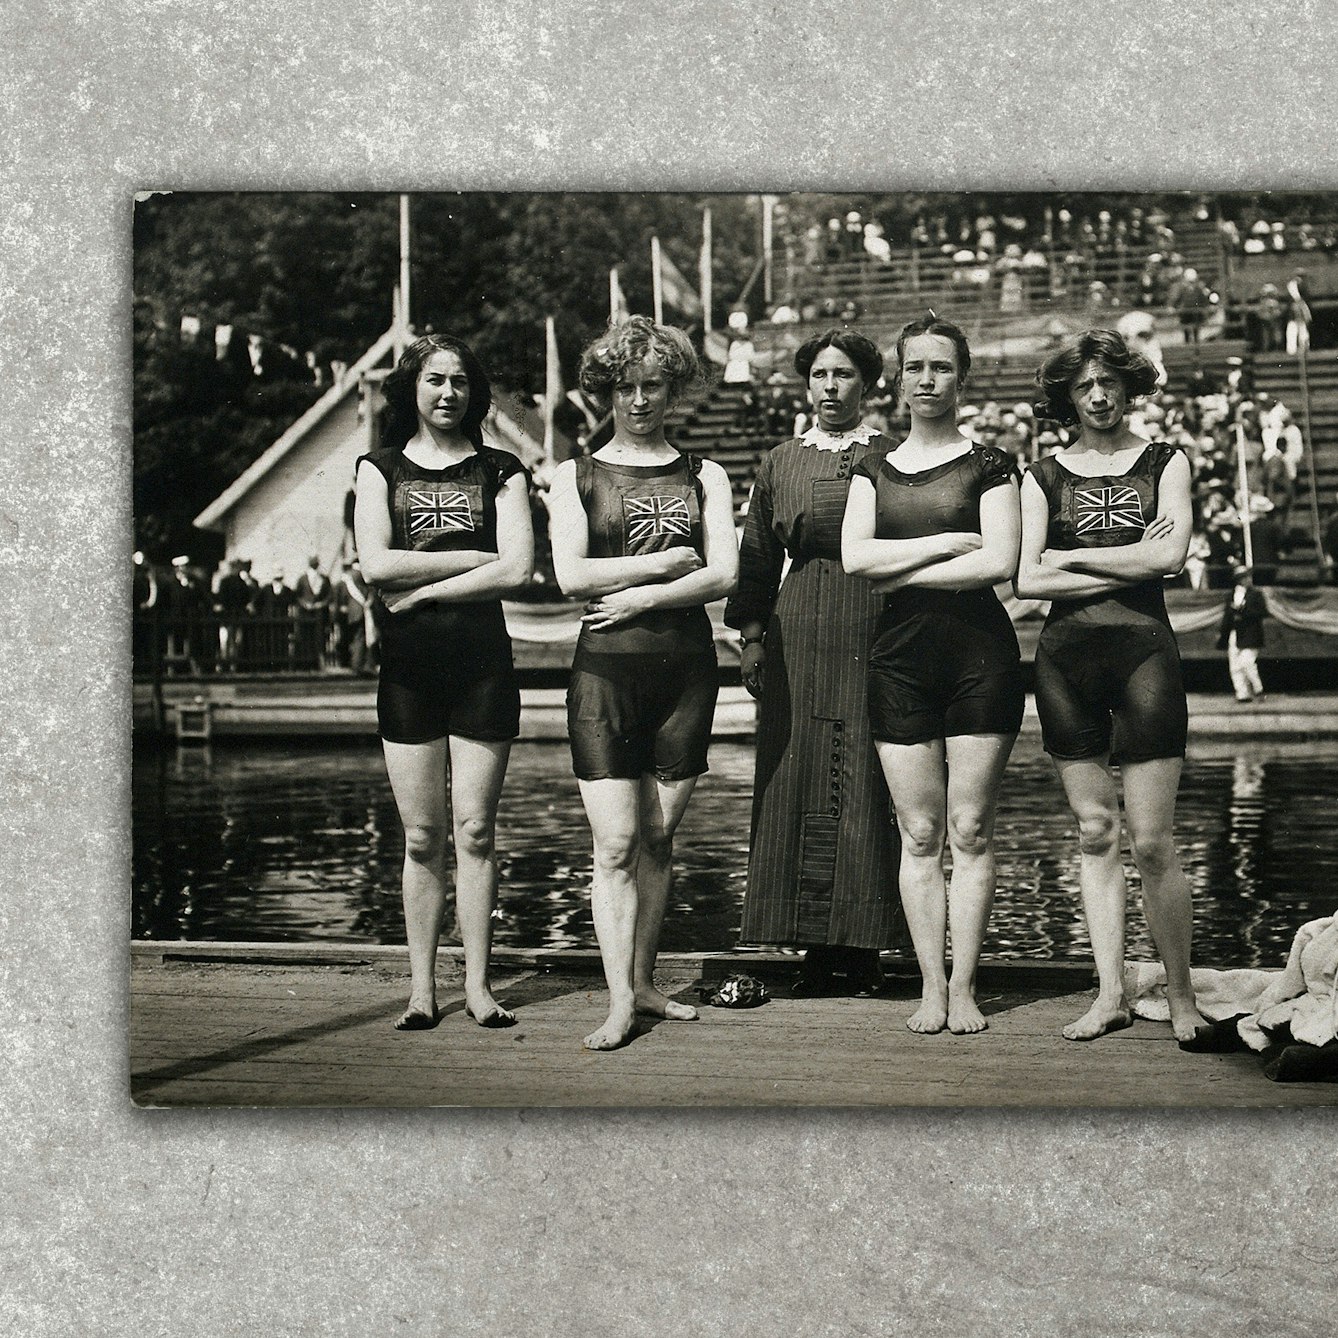 Photograph of a black and white photographic postcard showing the victorious English 400m women's relay swimming team at the Stockholm Olympic Games in 1912. It shows 4 female swimmers wearing swimming costumes with Union jack flags on the front, standing in a line beside an open air pool. In the middle of the four swimmer is another lady who is fully clothed. The postcard has been photographed against a grey concrete background.